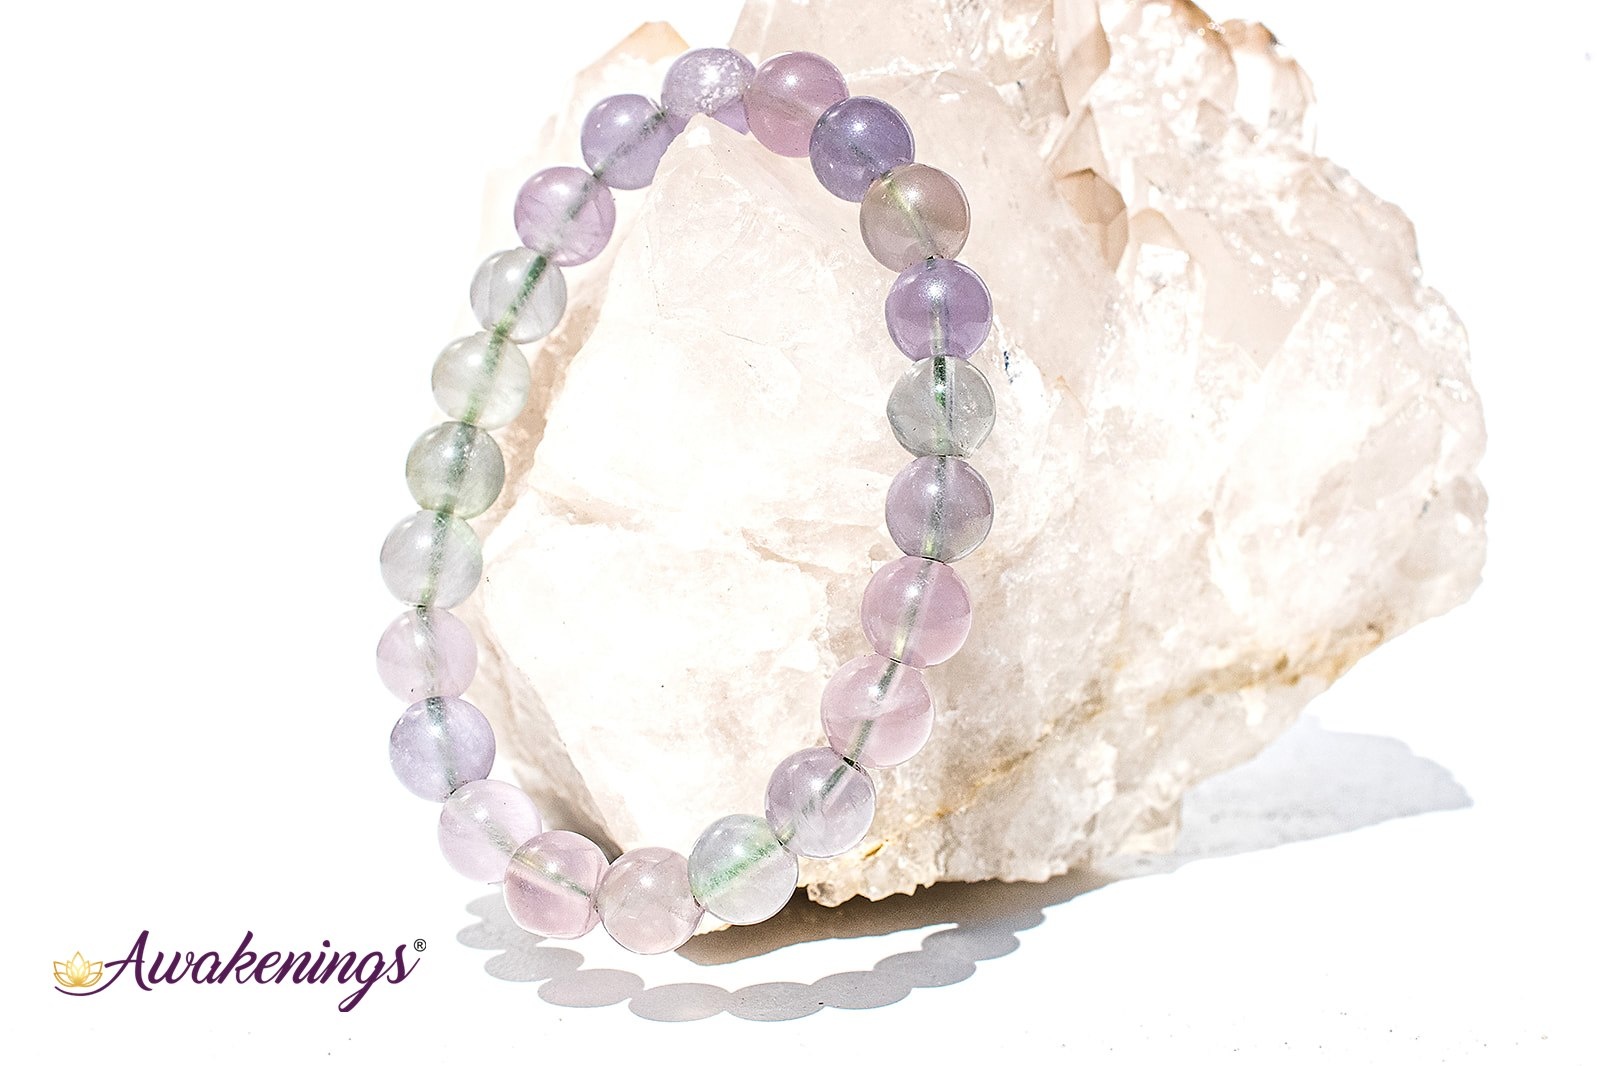 Peace & Tranquility Bracelet (8mm Beads) Large - 7.5